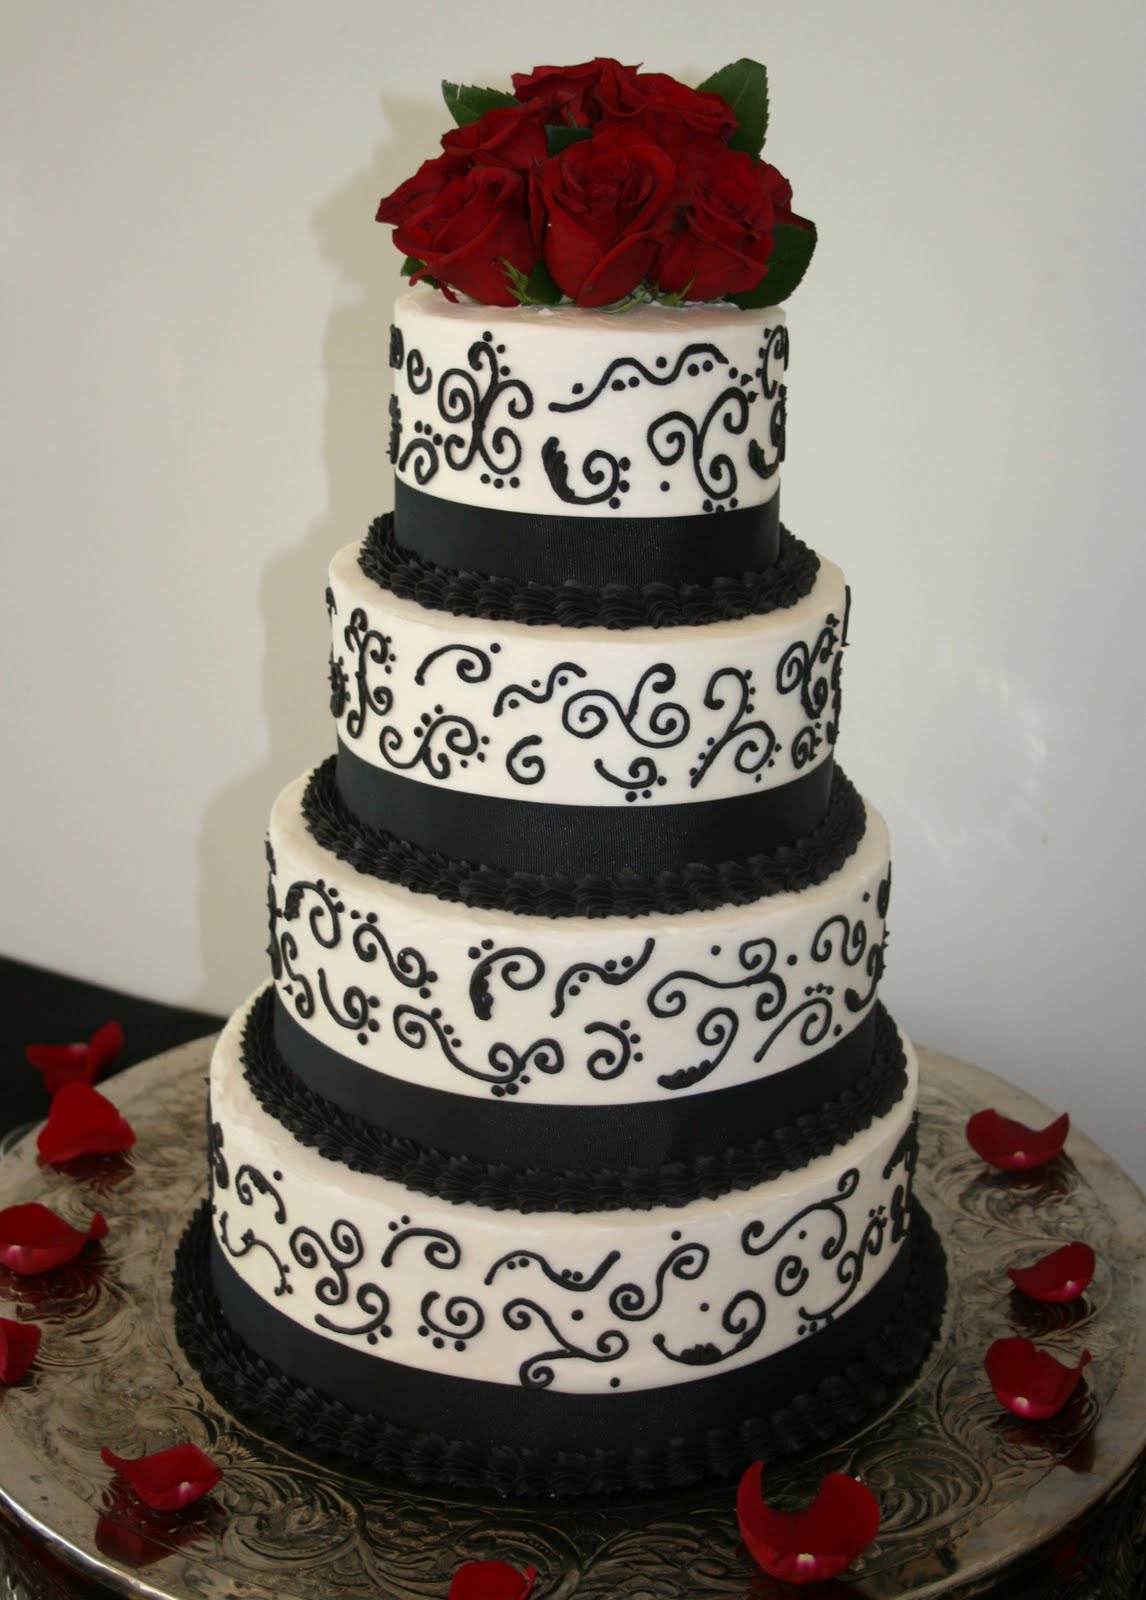 How To Decorate A Wedding Cake